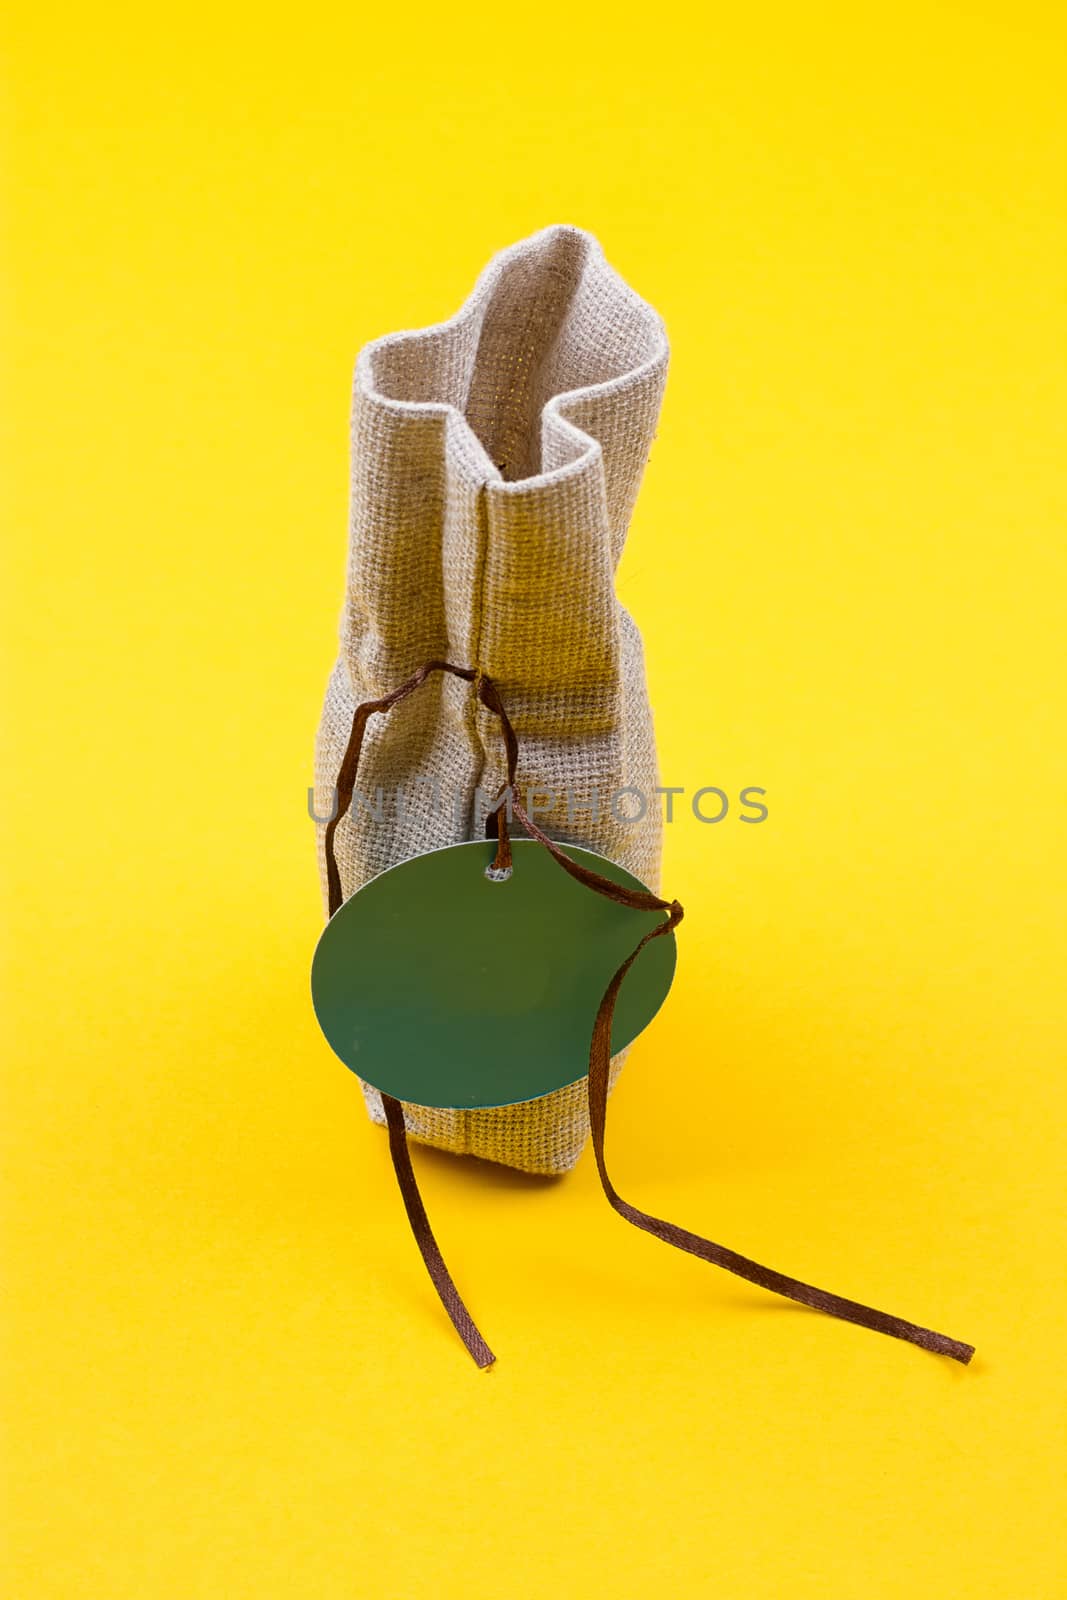 Bag of sackcloth with a blue tag by victosha